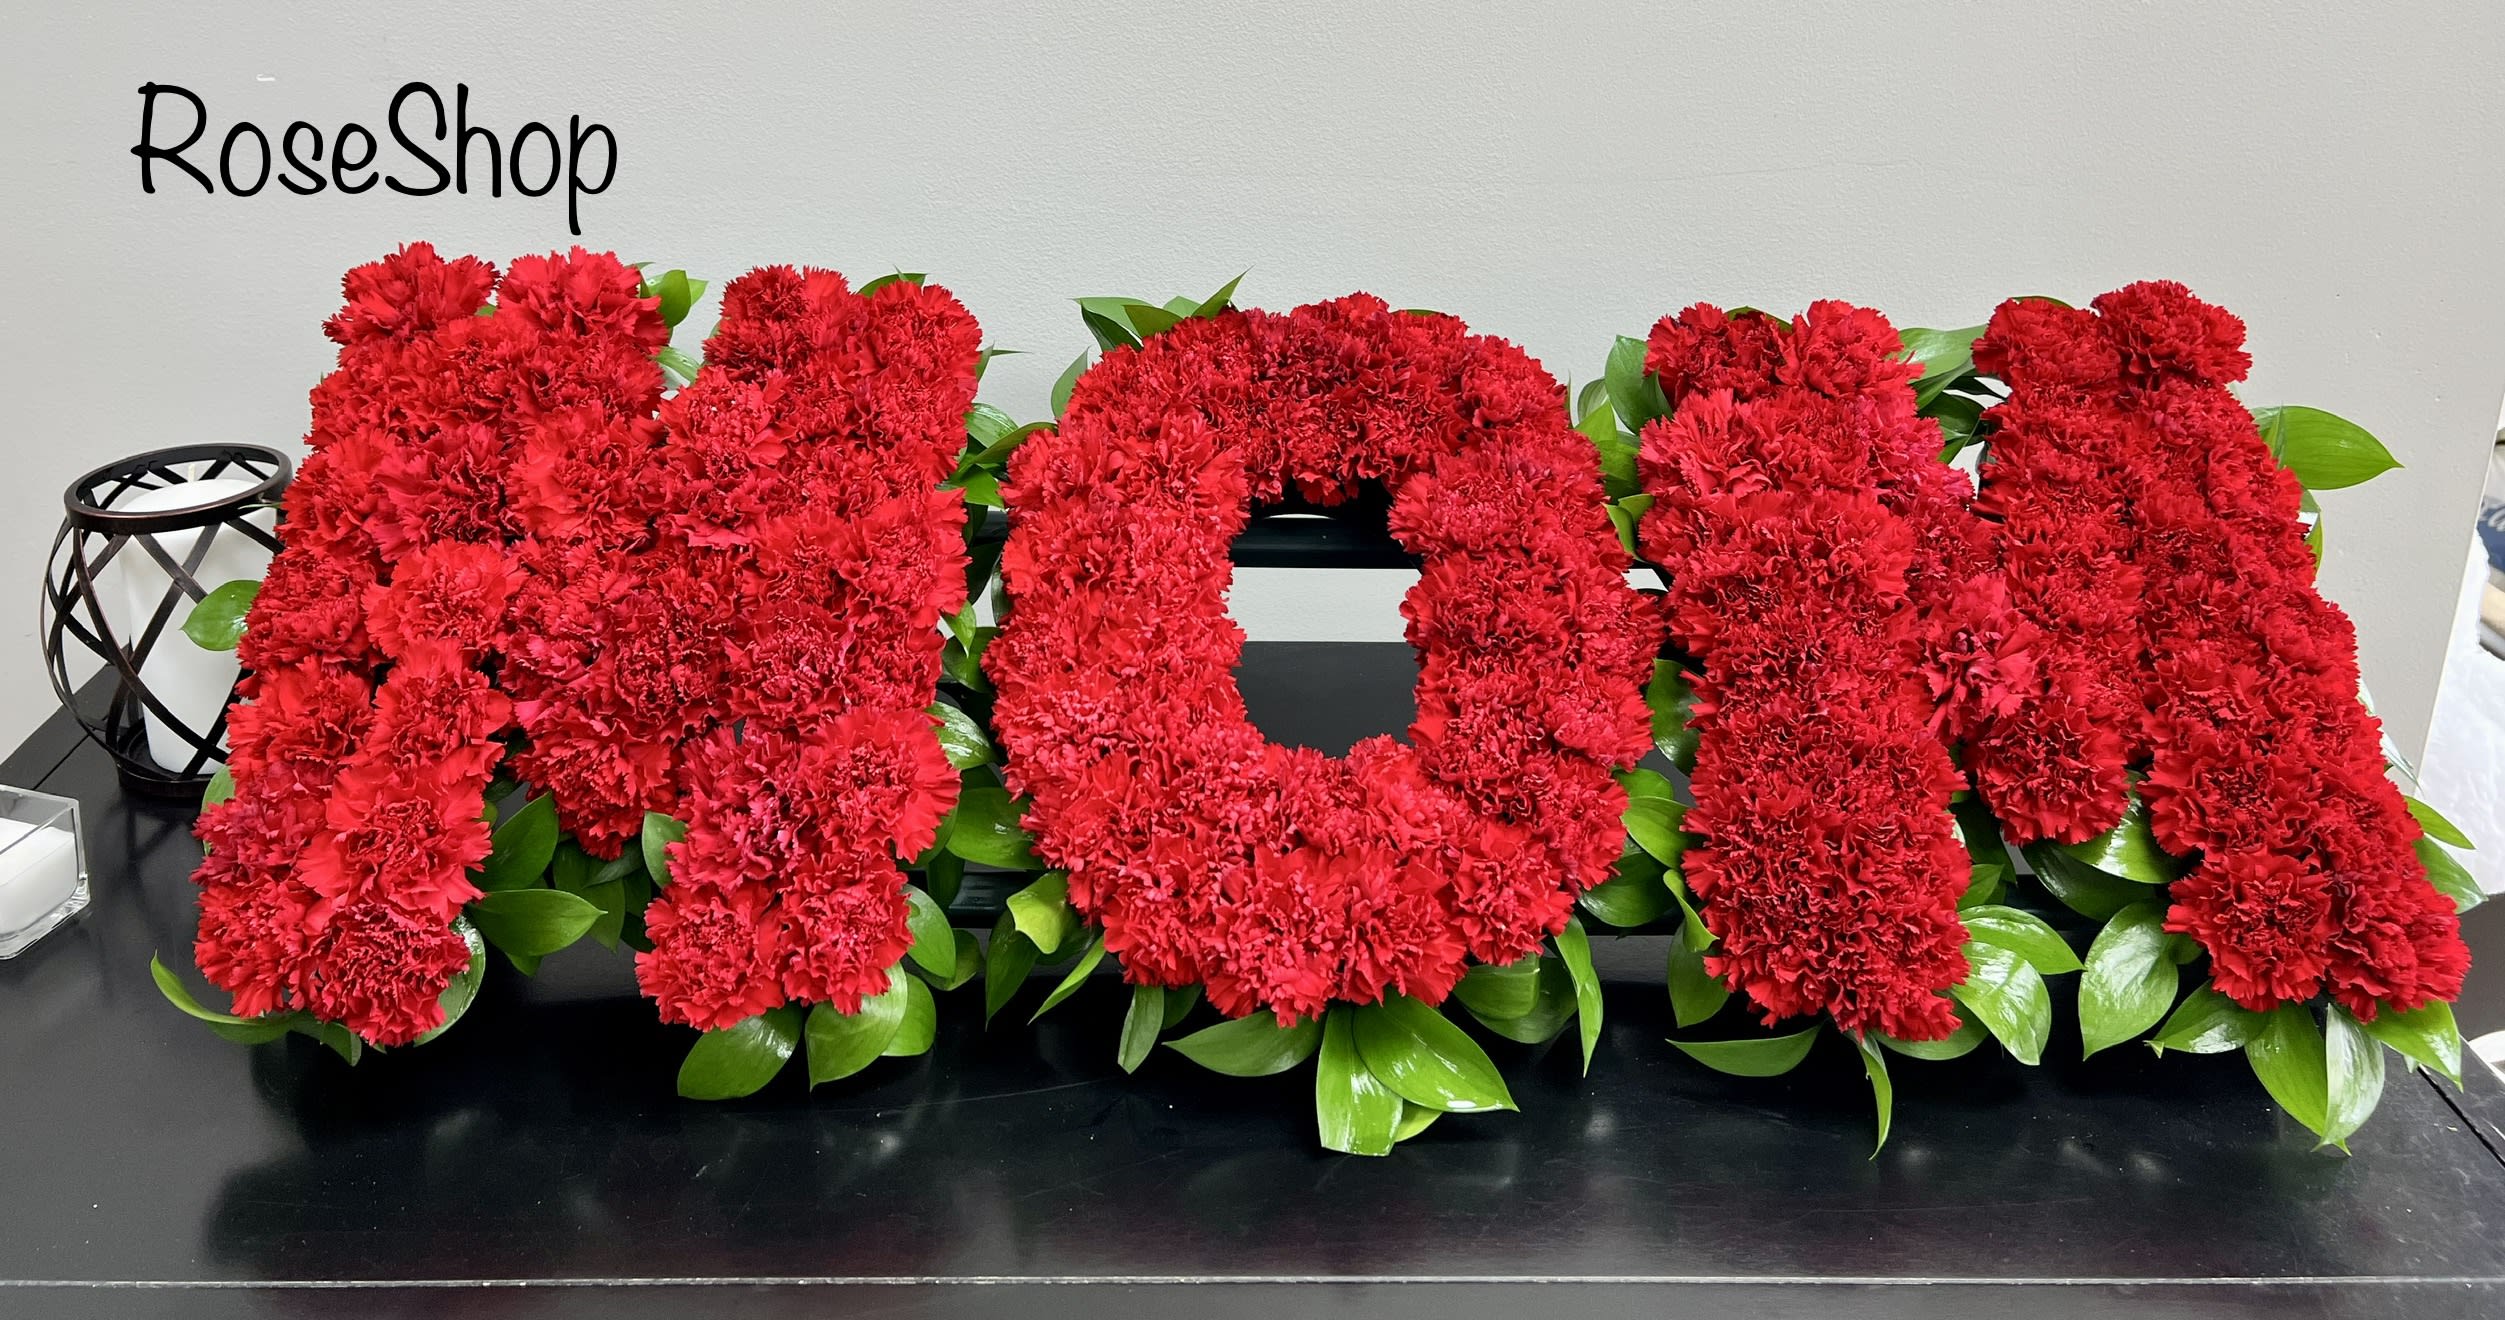 Mum Floral Tribute - Floral funeral letters spelling the word MUM. Based in all red carnations. Edged with green leaves.   Size: 29cm (11&quot;) height, 85cm (33.5&quot;) width approx.  